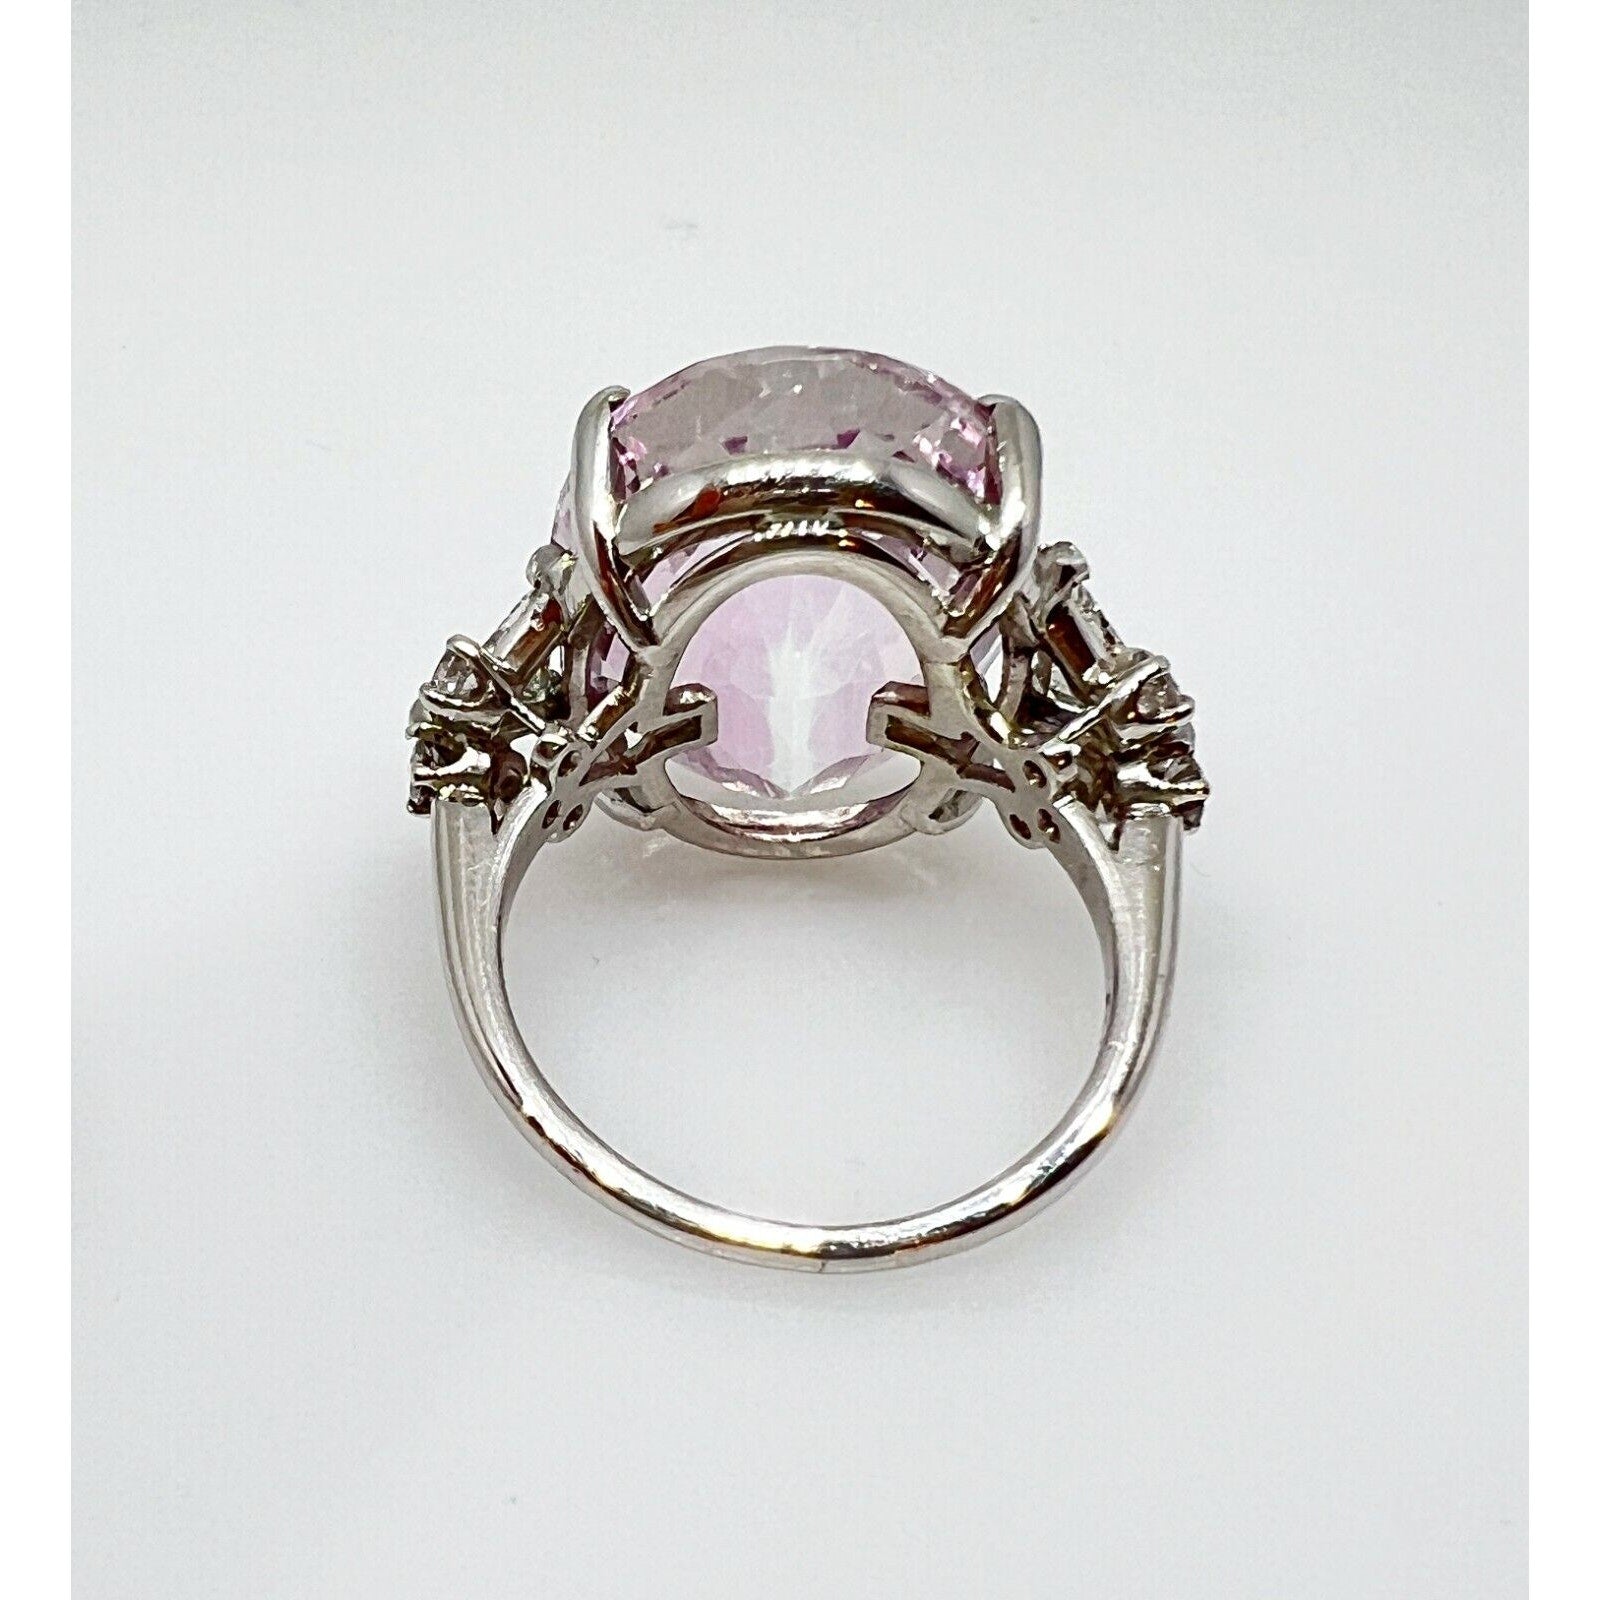 Large Oval Kunzite and Diamond Cocktail Ring in Platinum -- HM2294SE